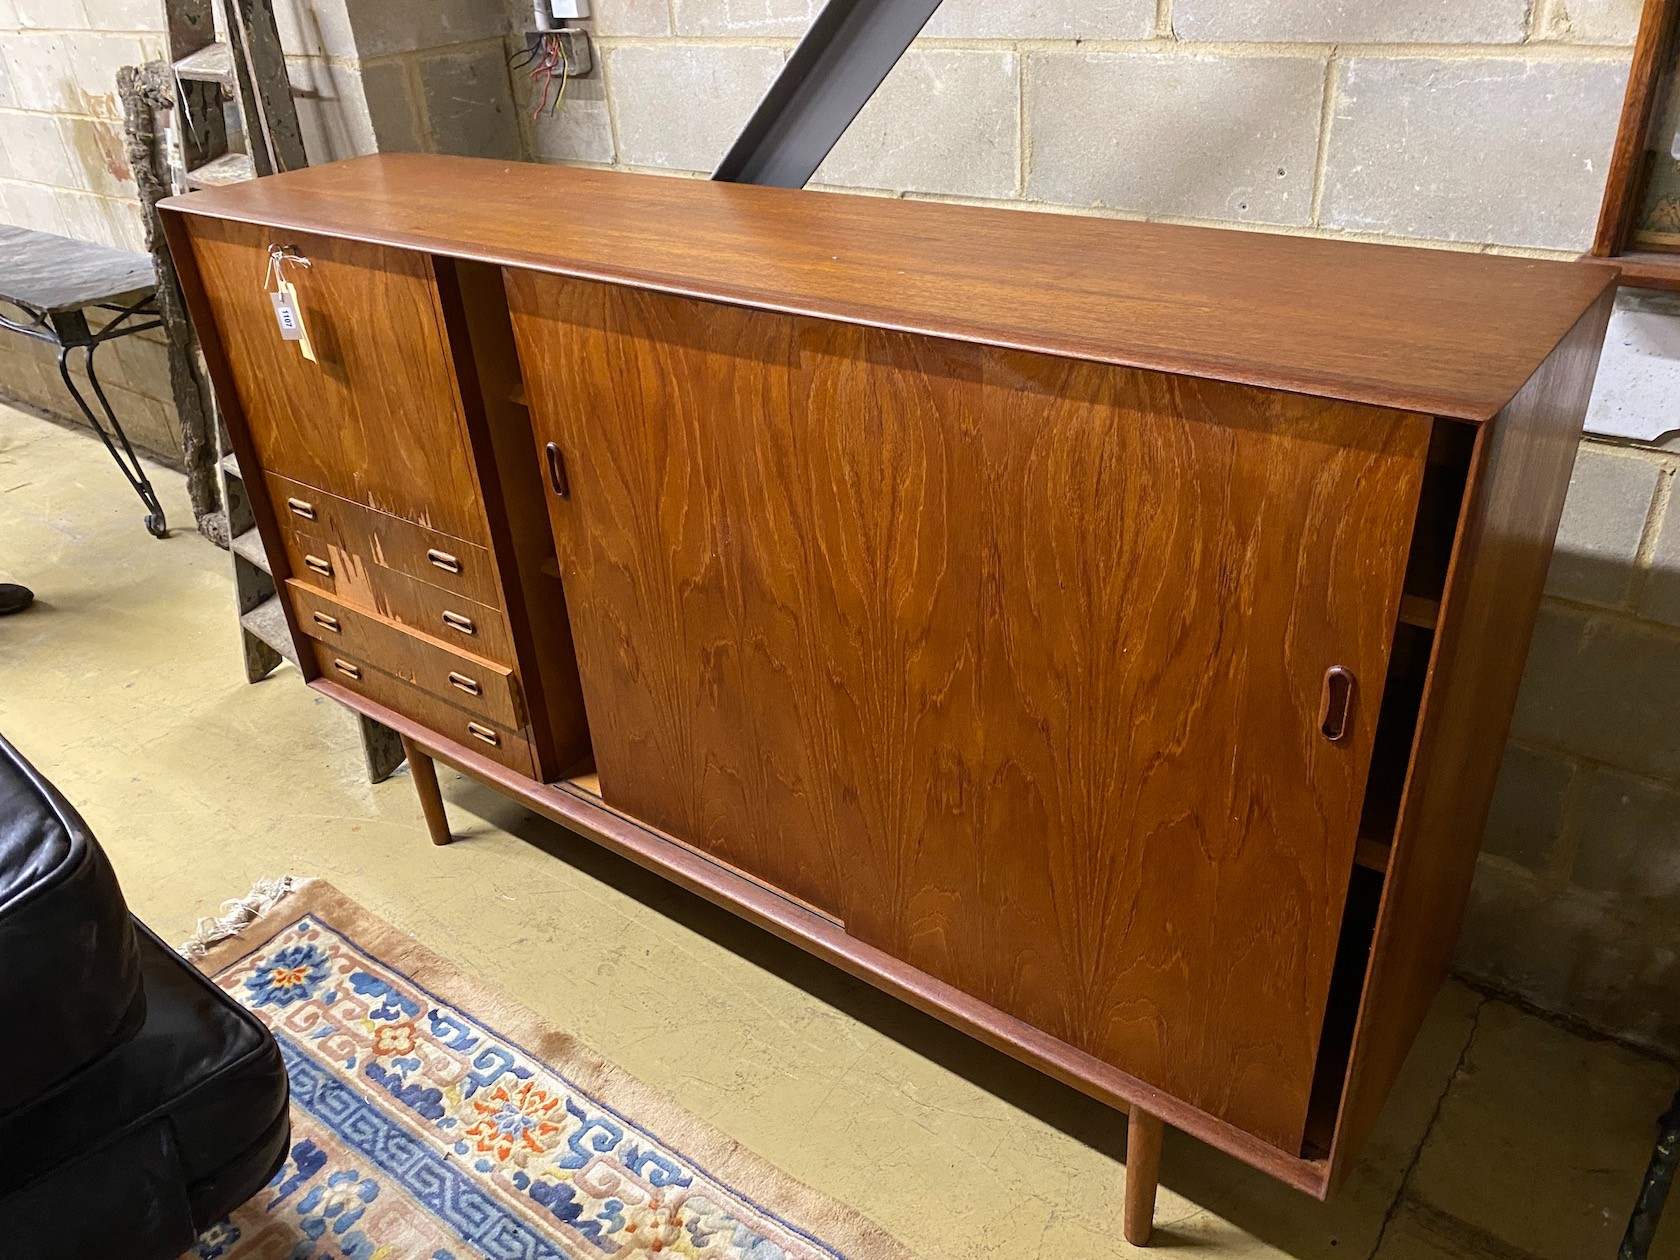 A mid century teak side cabinet (with faults), length 198cm, depth 45cm, height 121cm